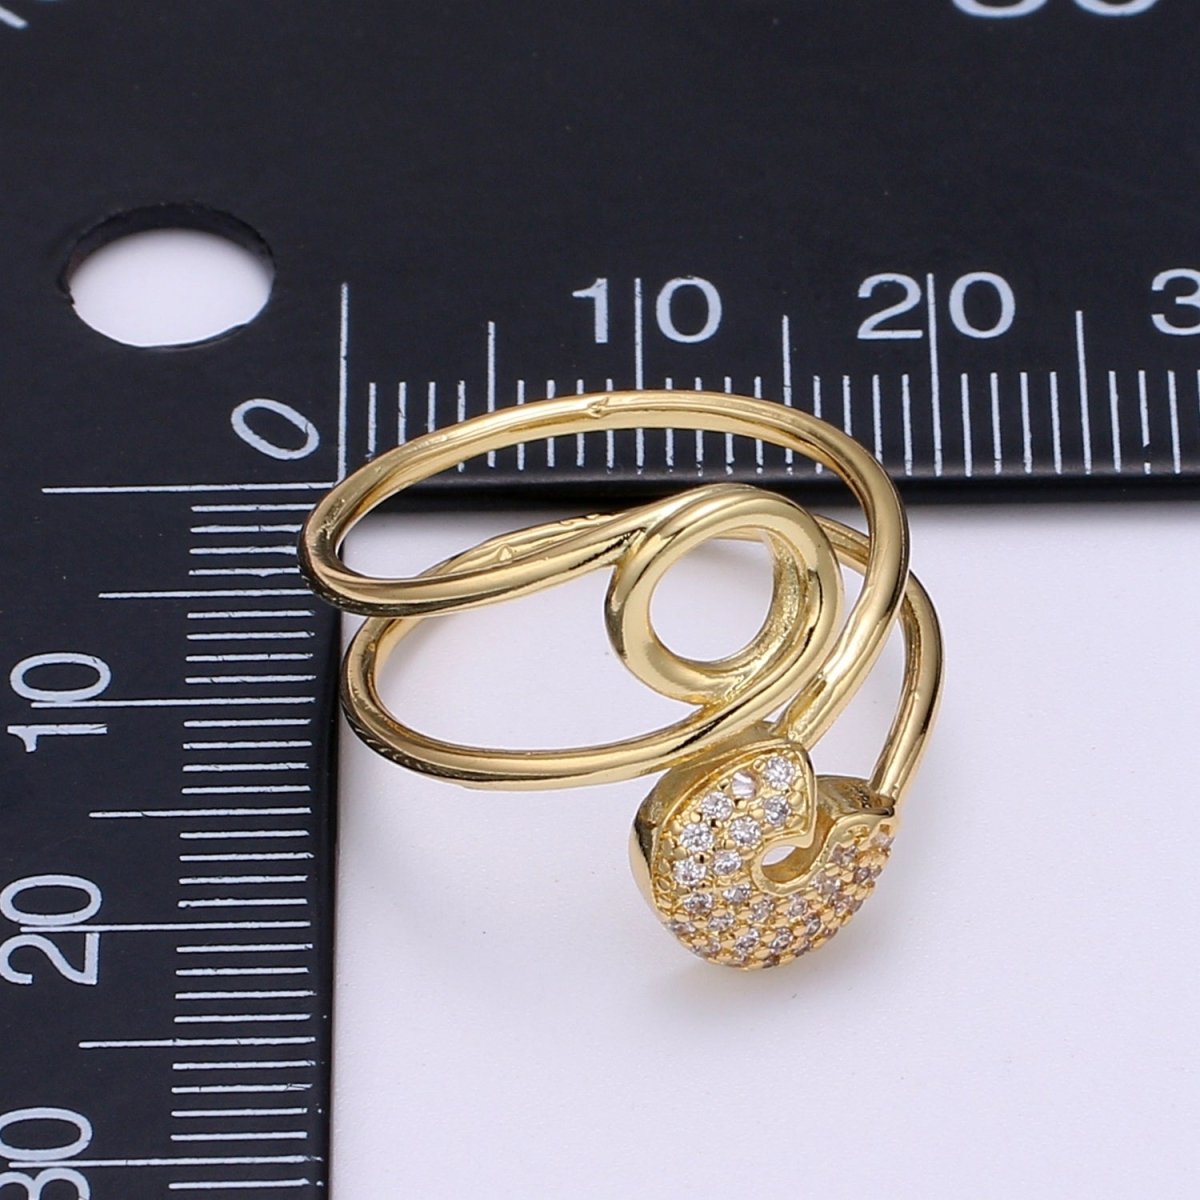 Safety pin ring Cz Swirl ring Eternity ring Eternity band Fashion ring Safety pin jewelry Gold ring Stacking ring US Size 6 Ring O-277 - DLUXCA